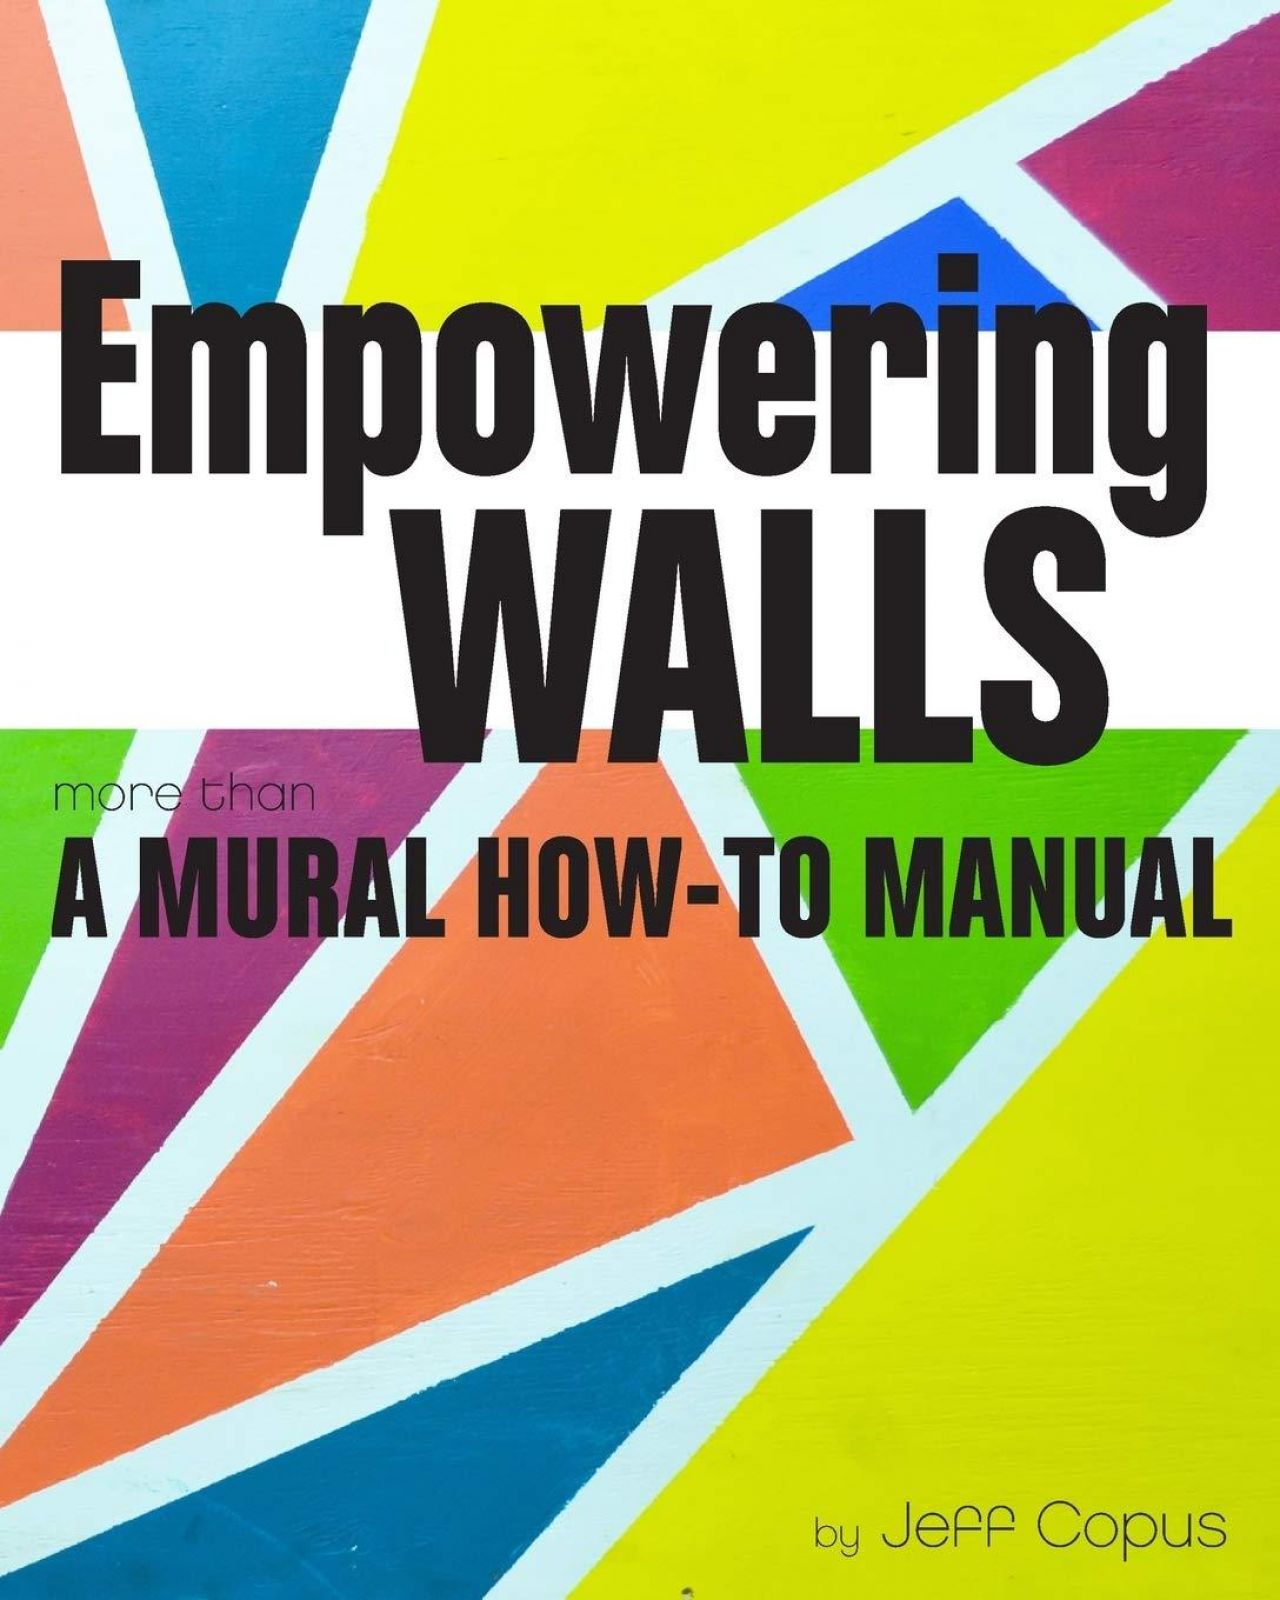 Book cover for Empowering Walls, by Jeff Copus